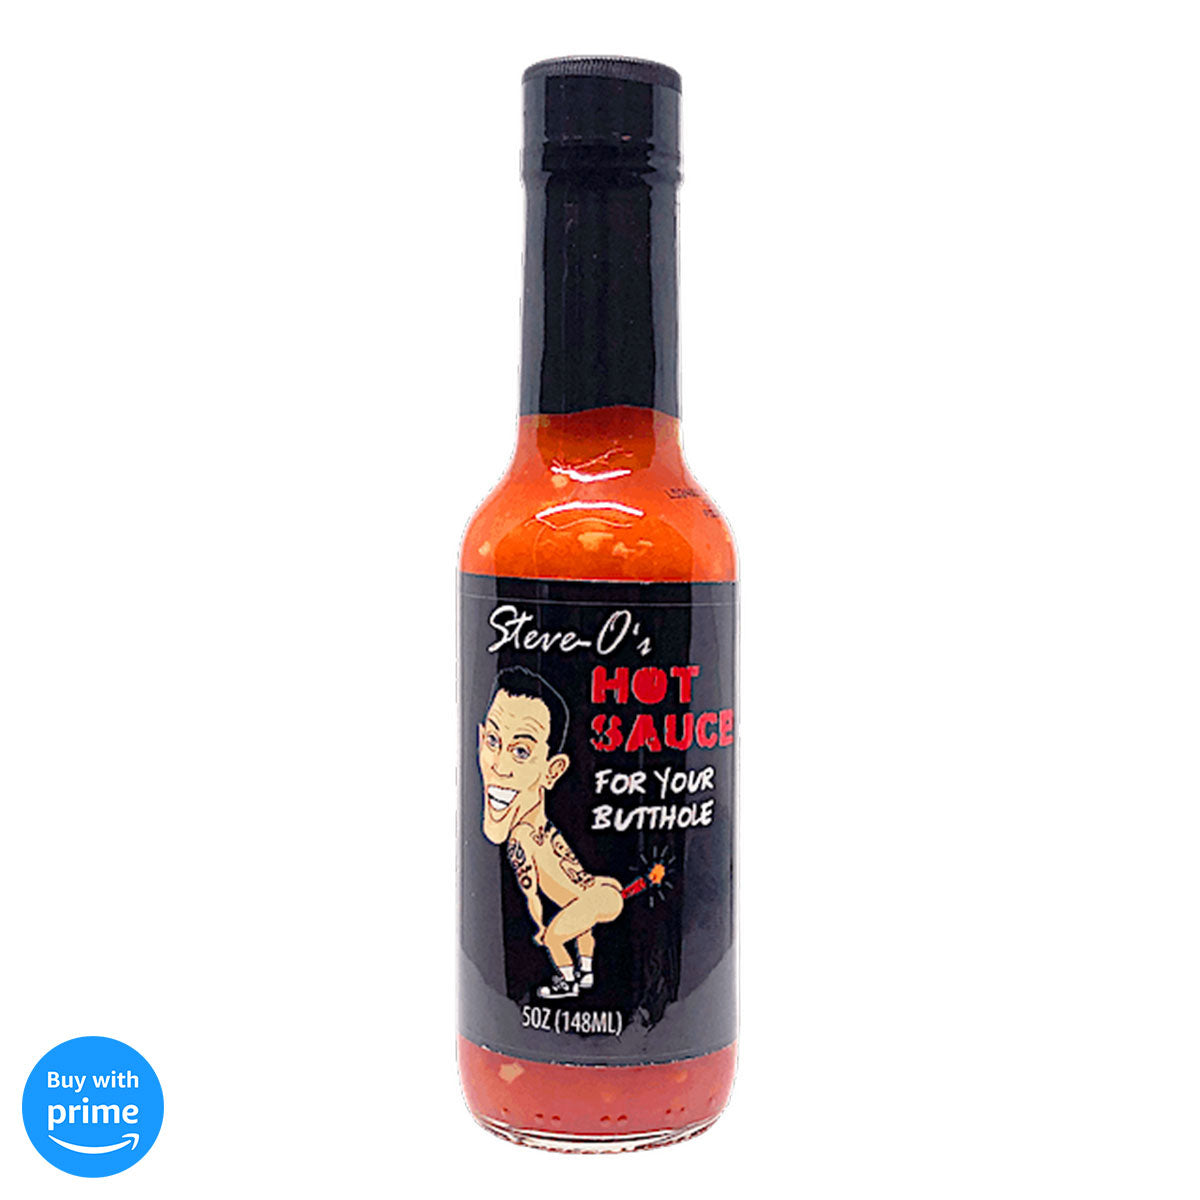 Steve-O's Hot Sauce For Your Butthole